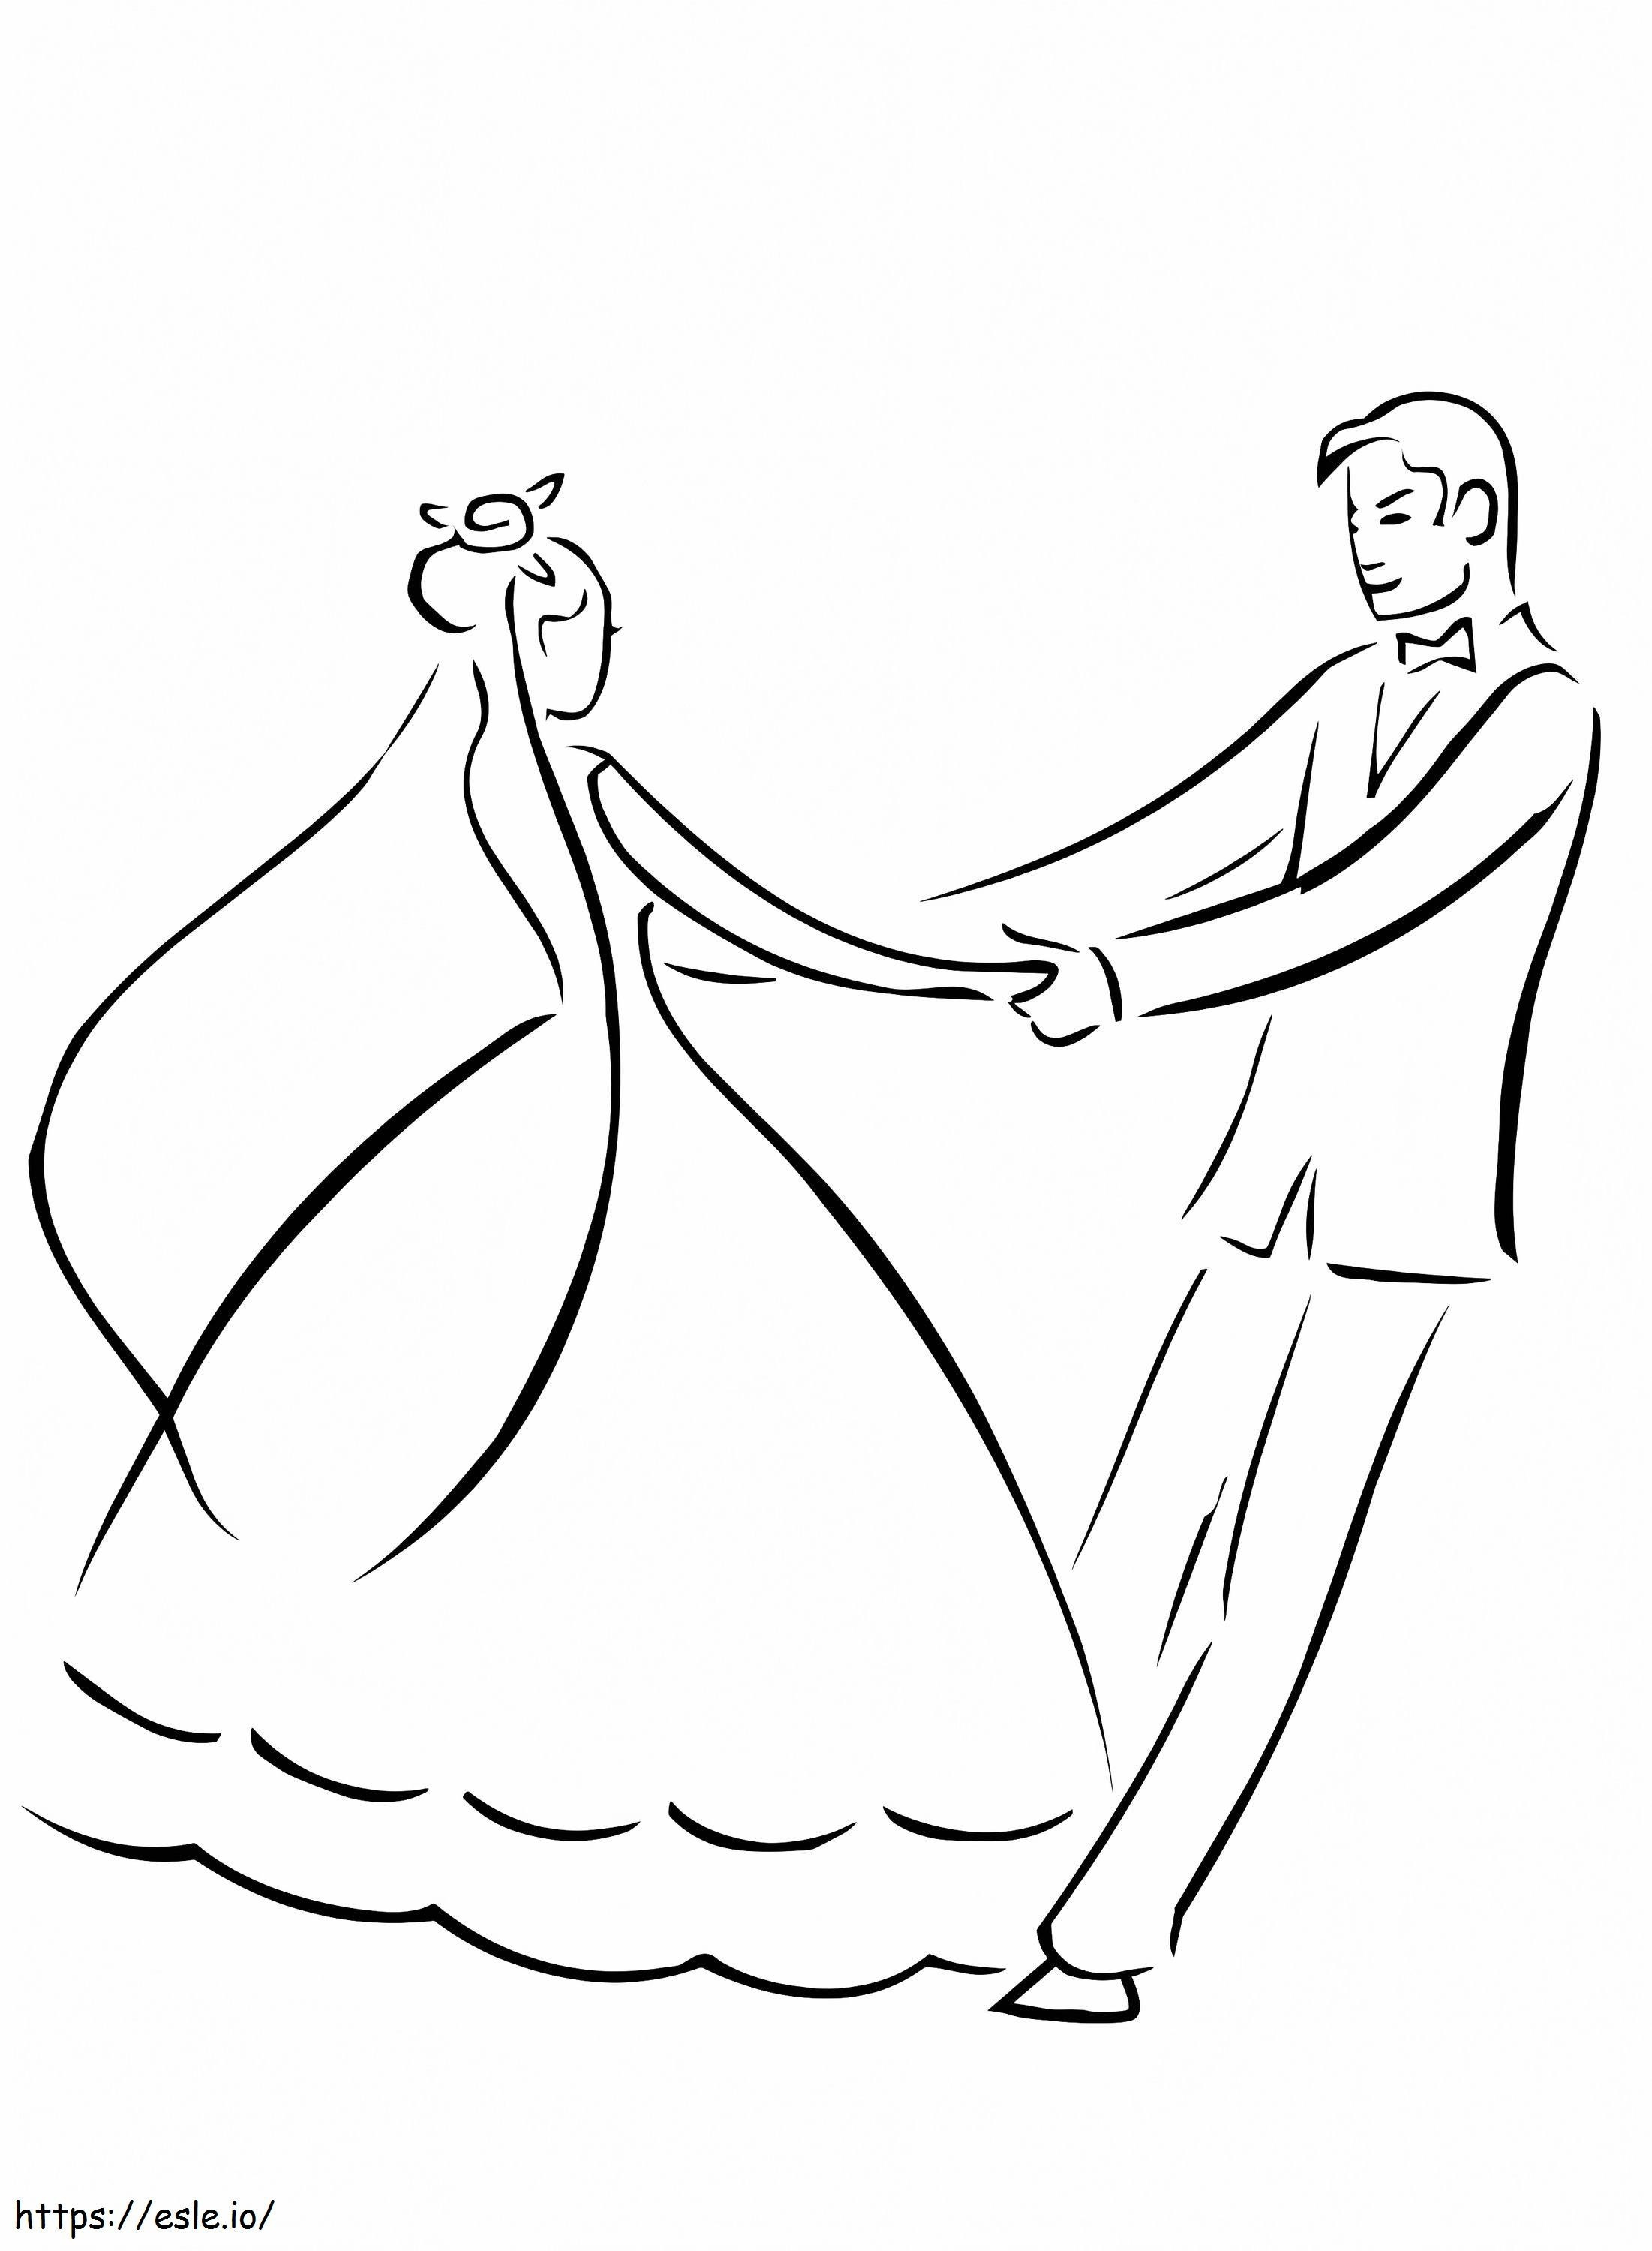 Wedding Dance coloring page